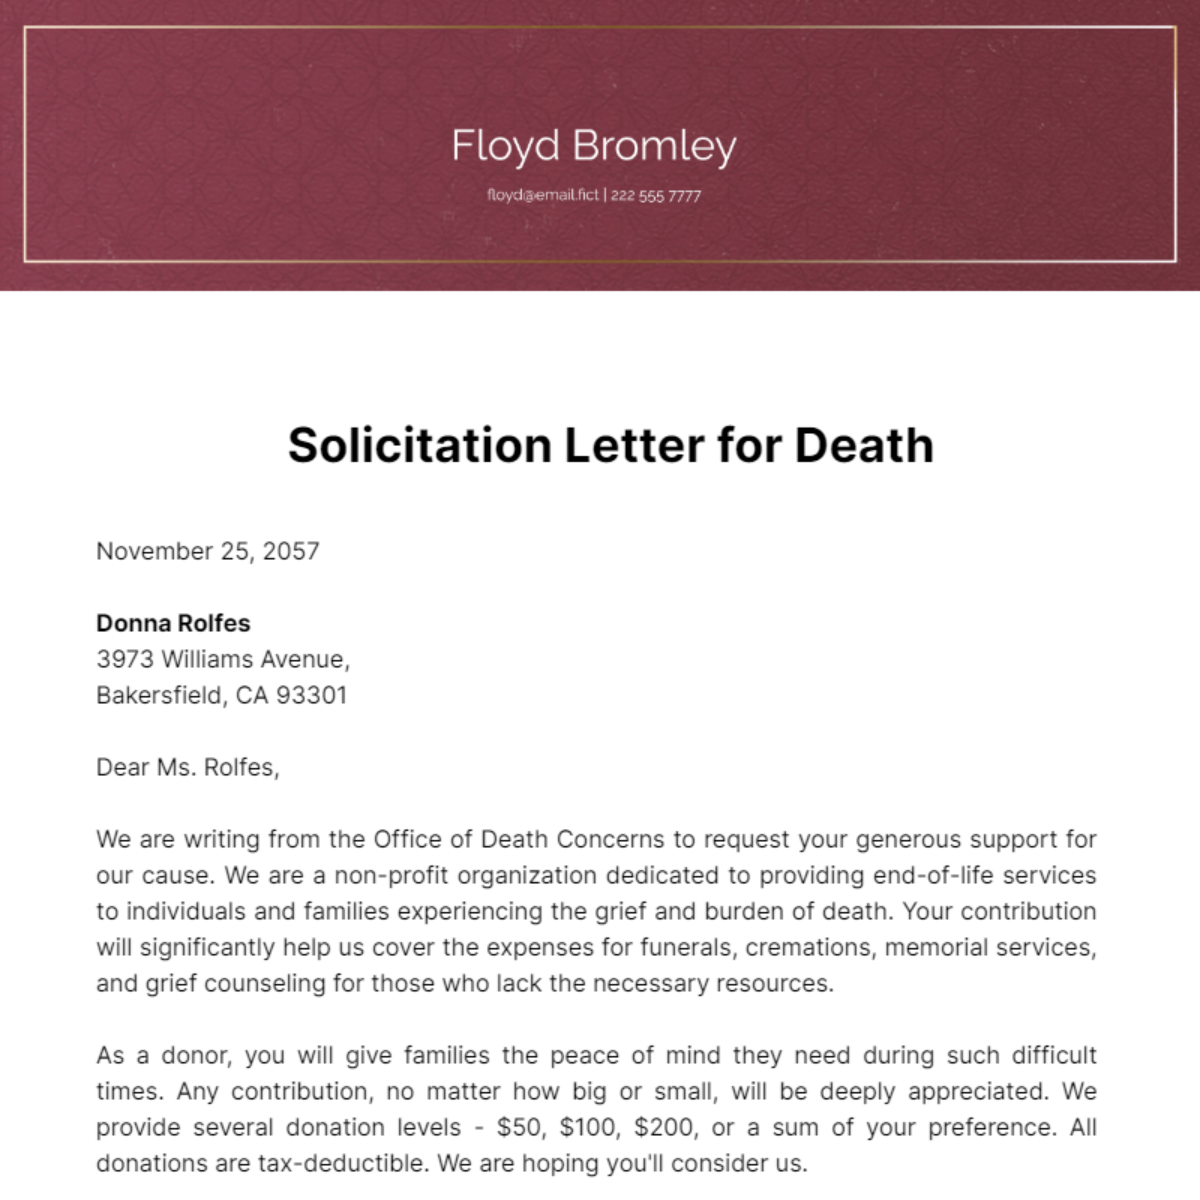 Free Solicitation Letter for Death Template